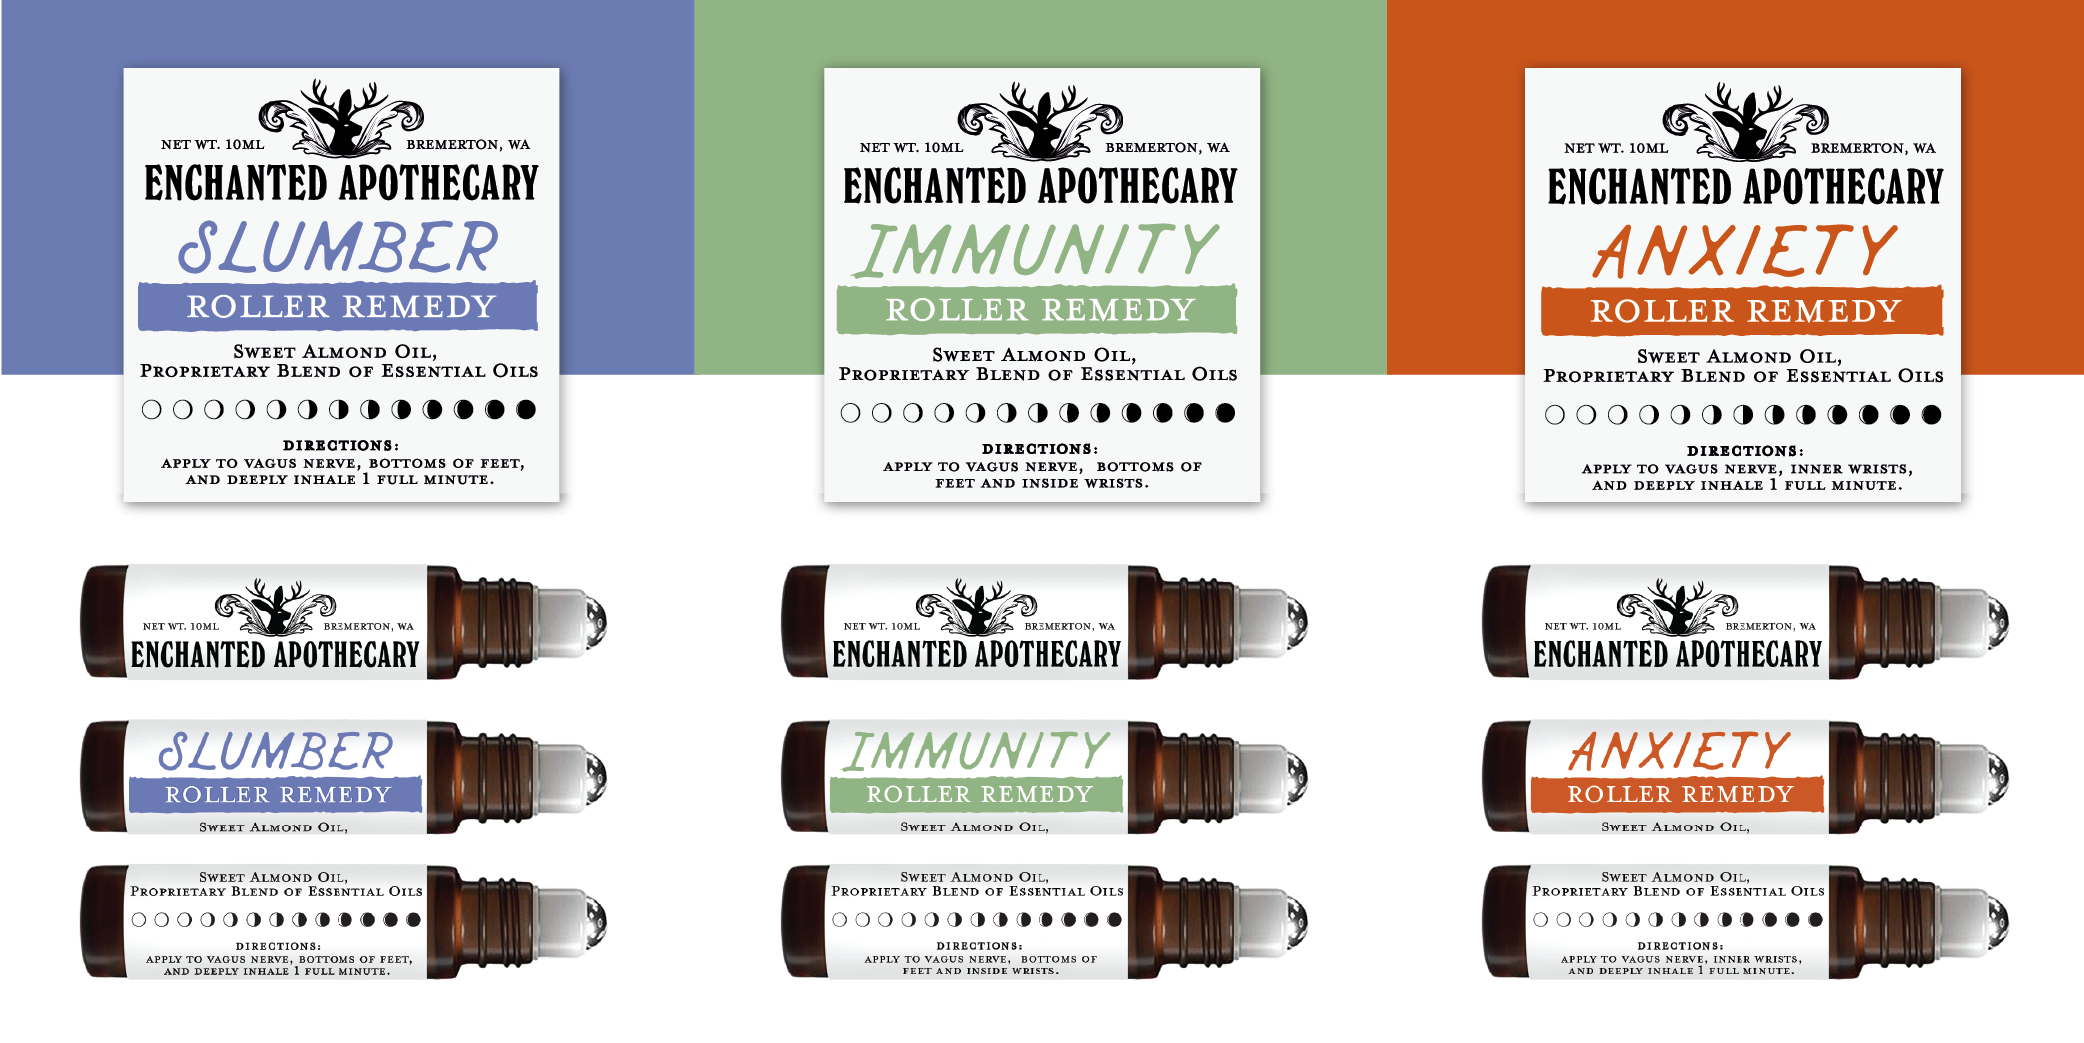 Images of aromatherapy rollers from Enchanted Apothecary. Designed by Fingers Duke.